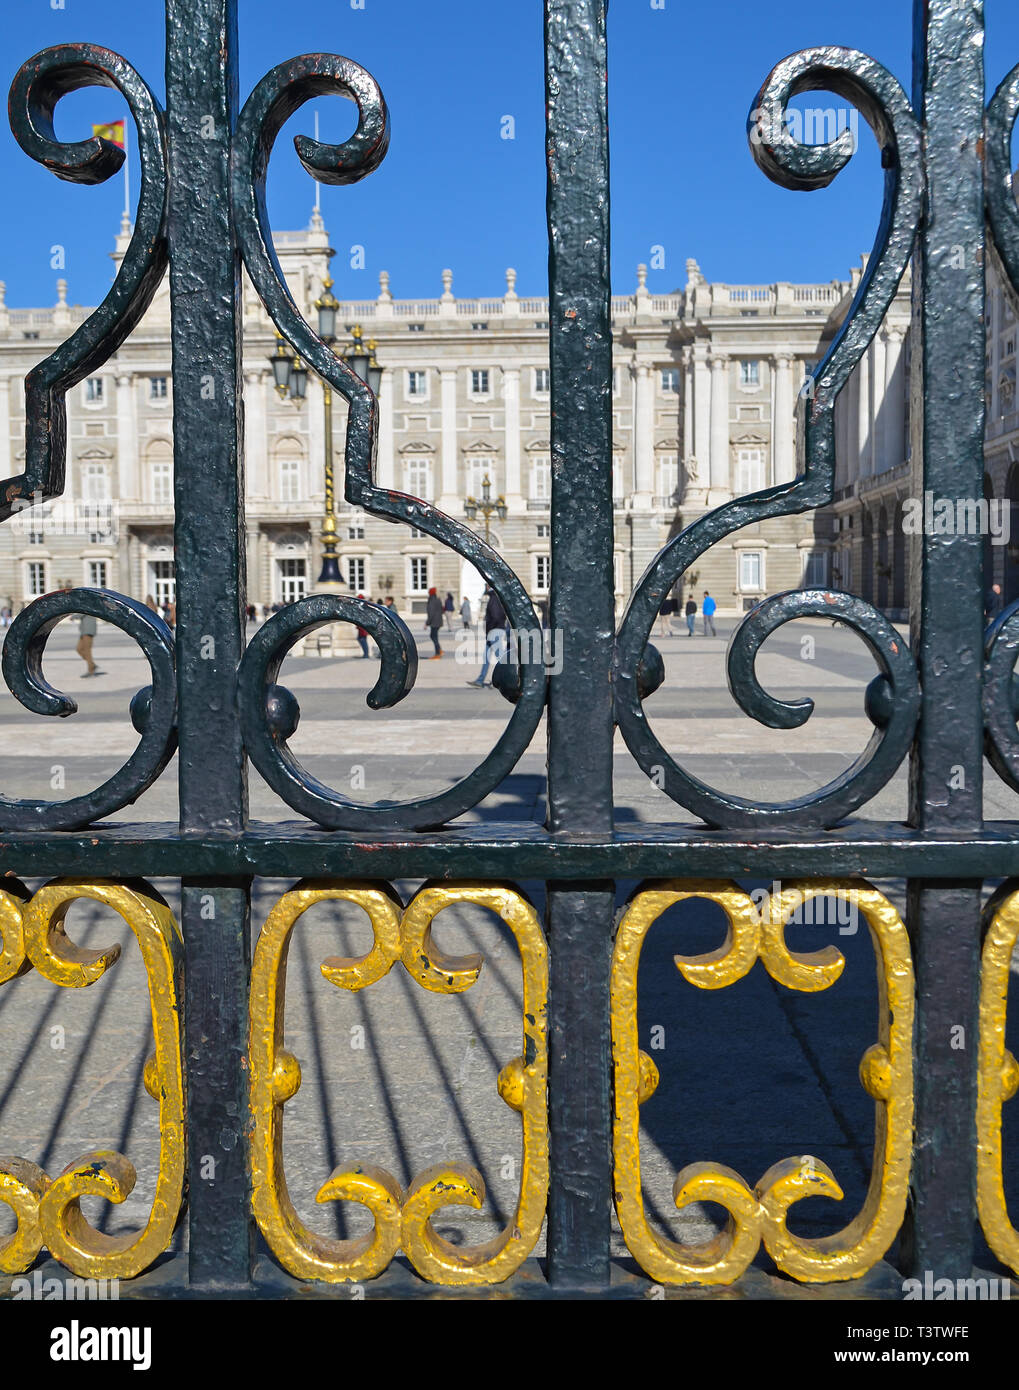 Royal Palace of Madrid viewed through the black and gold gate railings Stock Photo